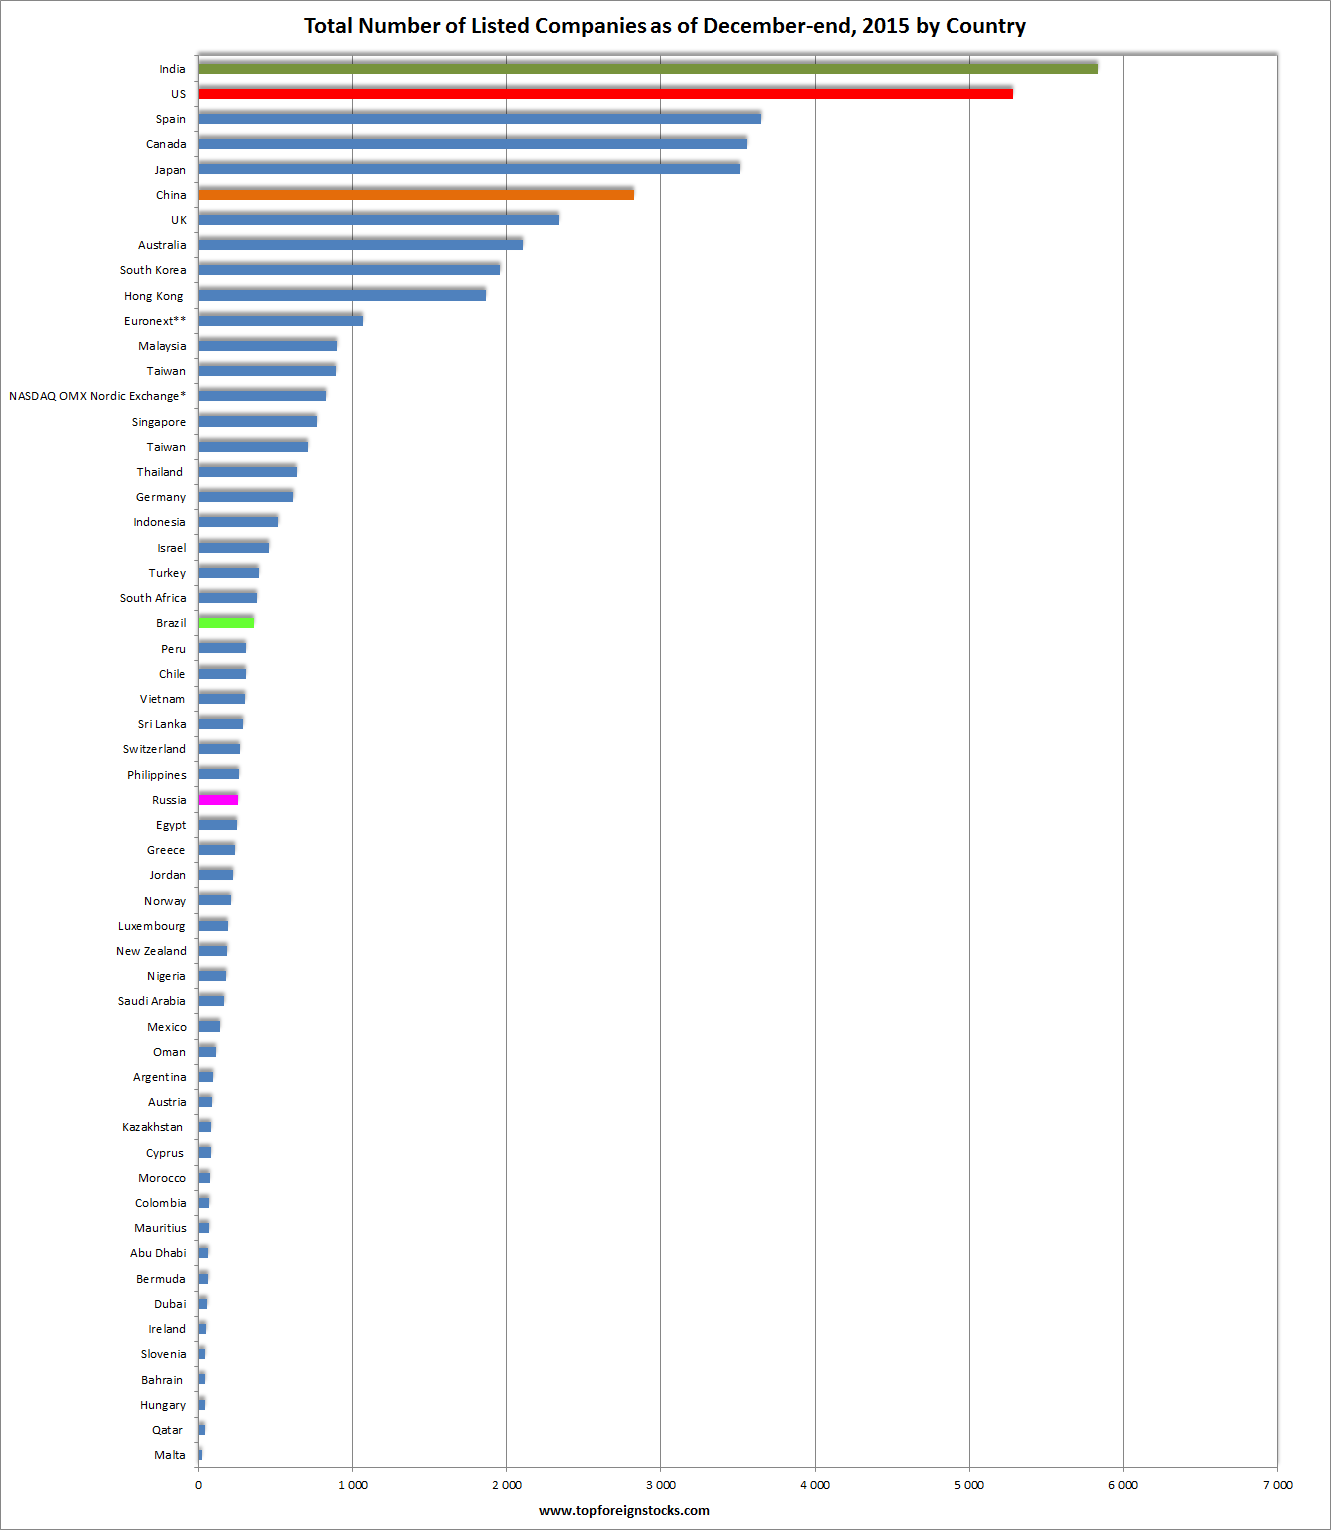 Total Listed Companies by Country-2015